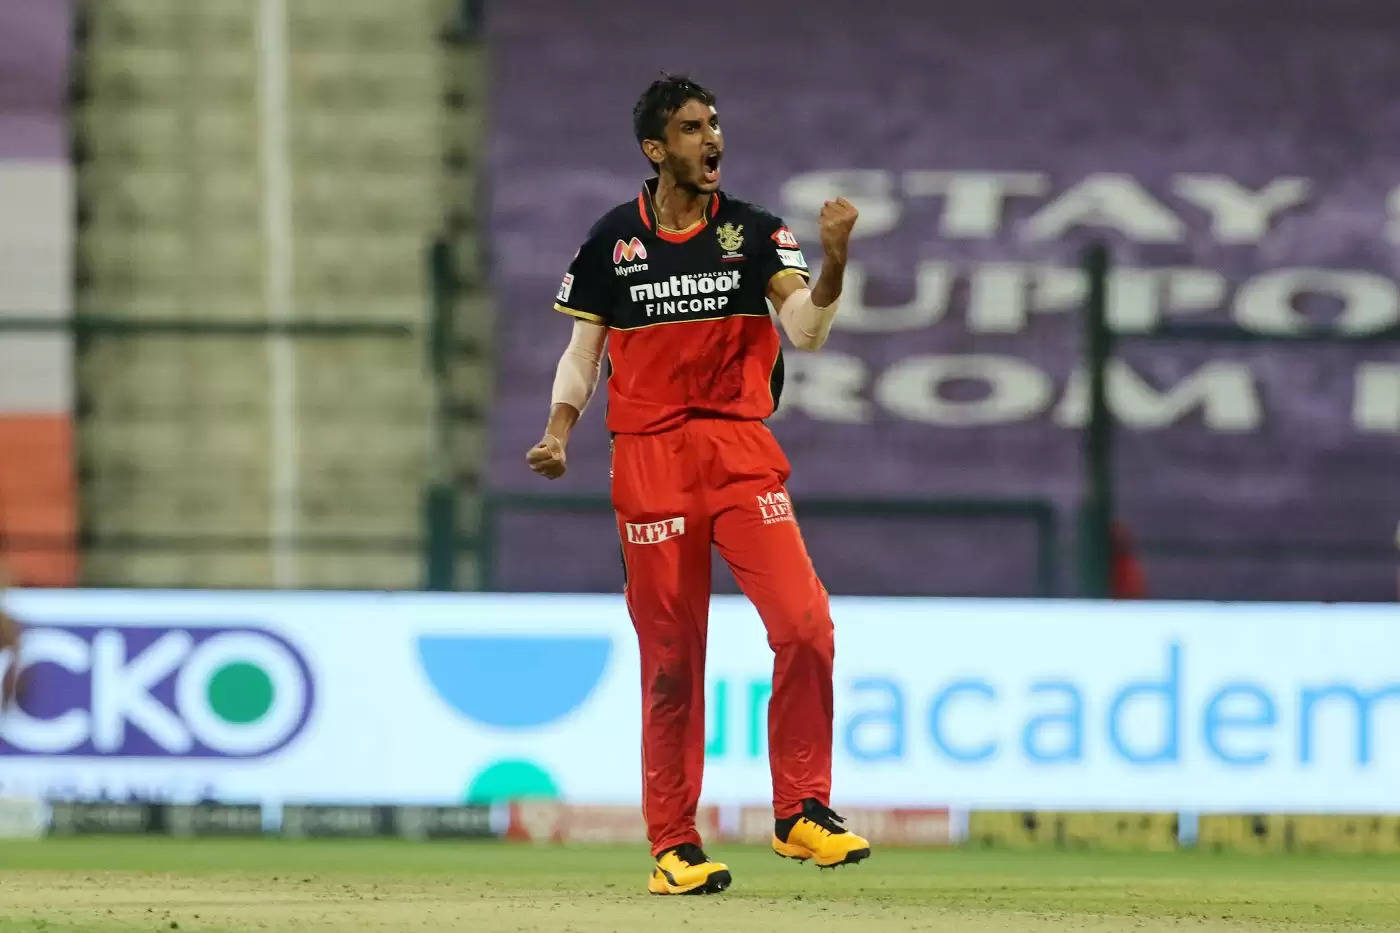 Shahbaz Ahmed plays for RCB in IPL